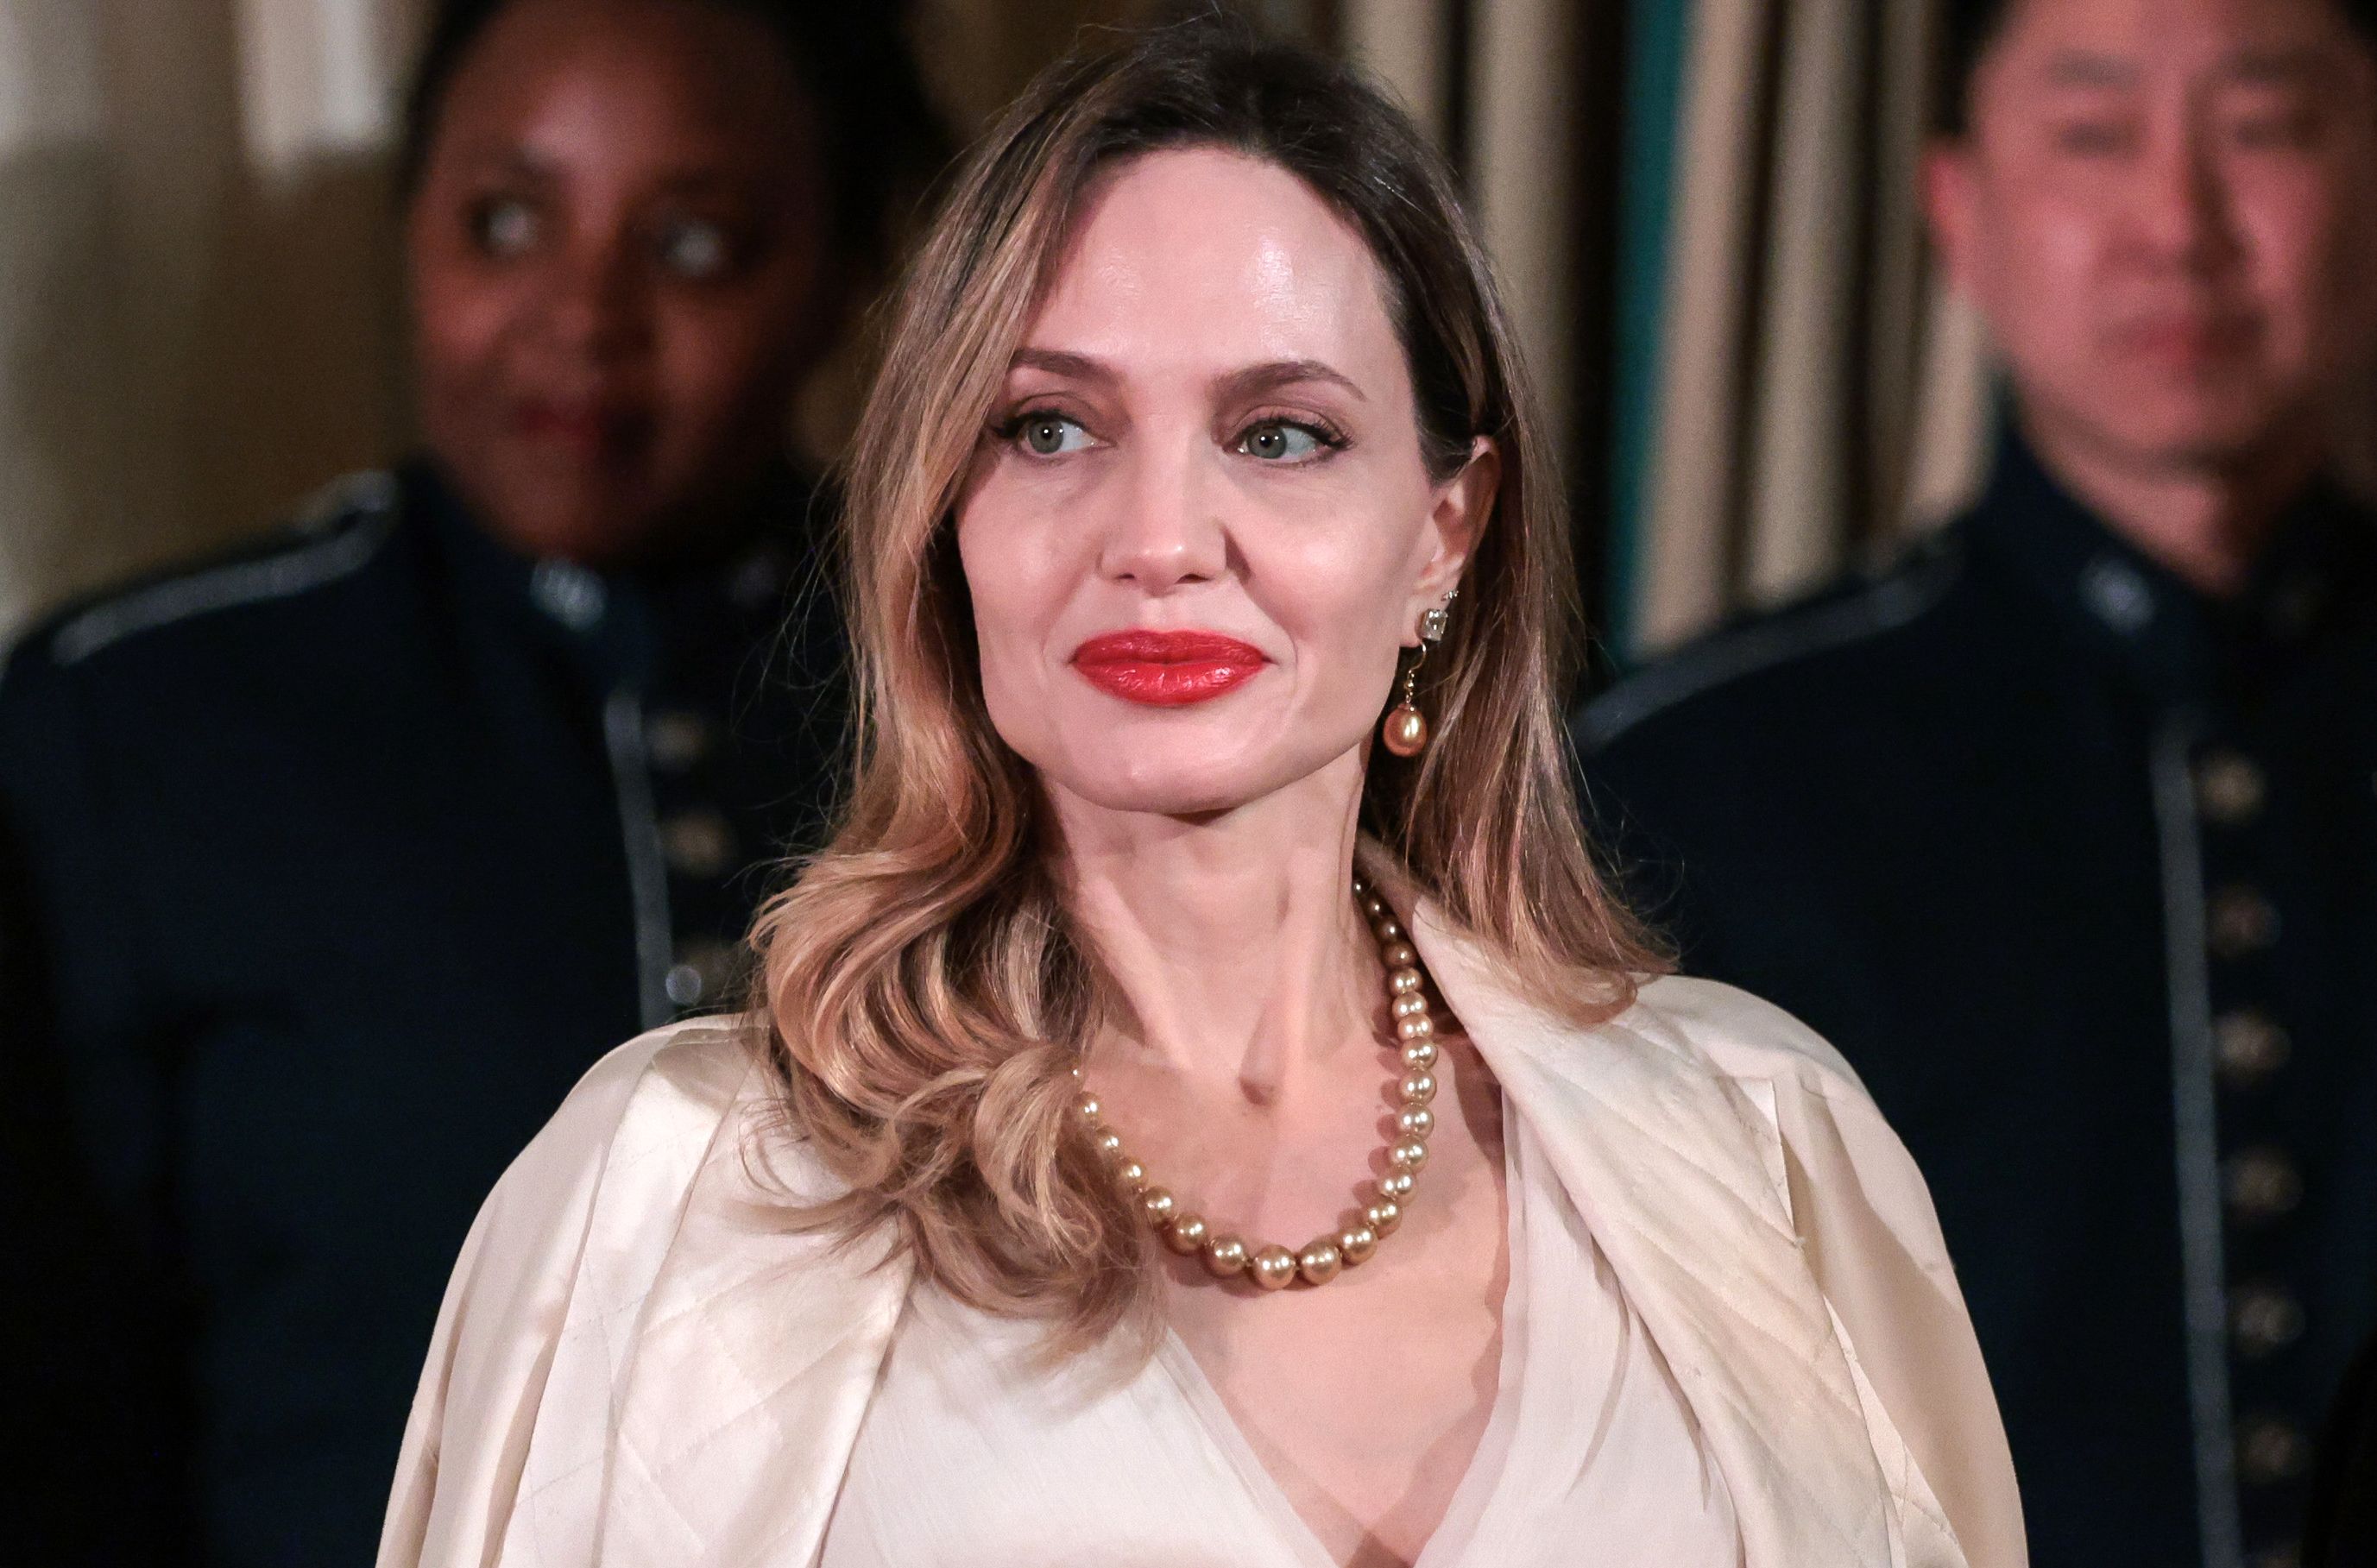 Angelina Jolie plans to move and calls Hollywood a 'shallow' and